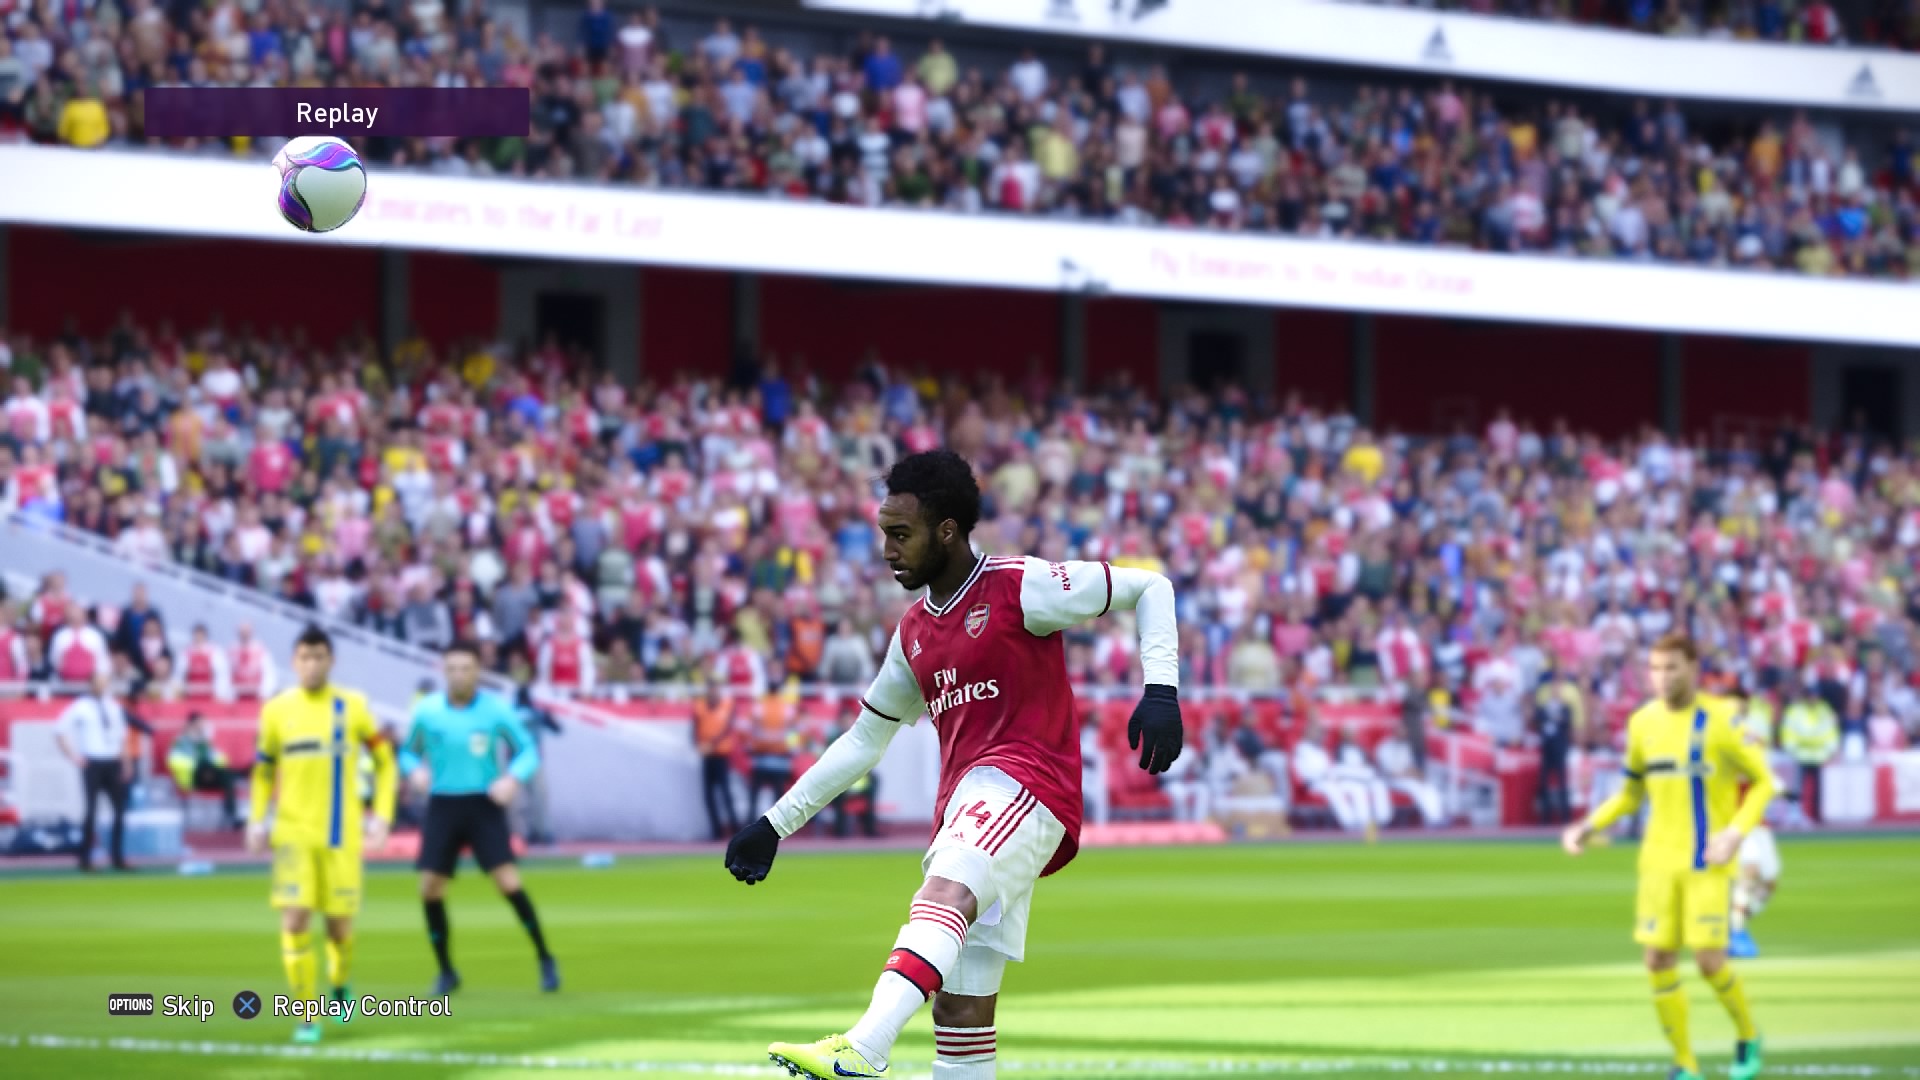 PES 2020: Review of Pro Evolution Soccer 2020 - Gameplay, features & videos